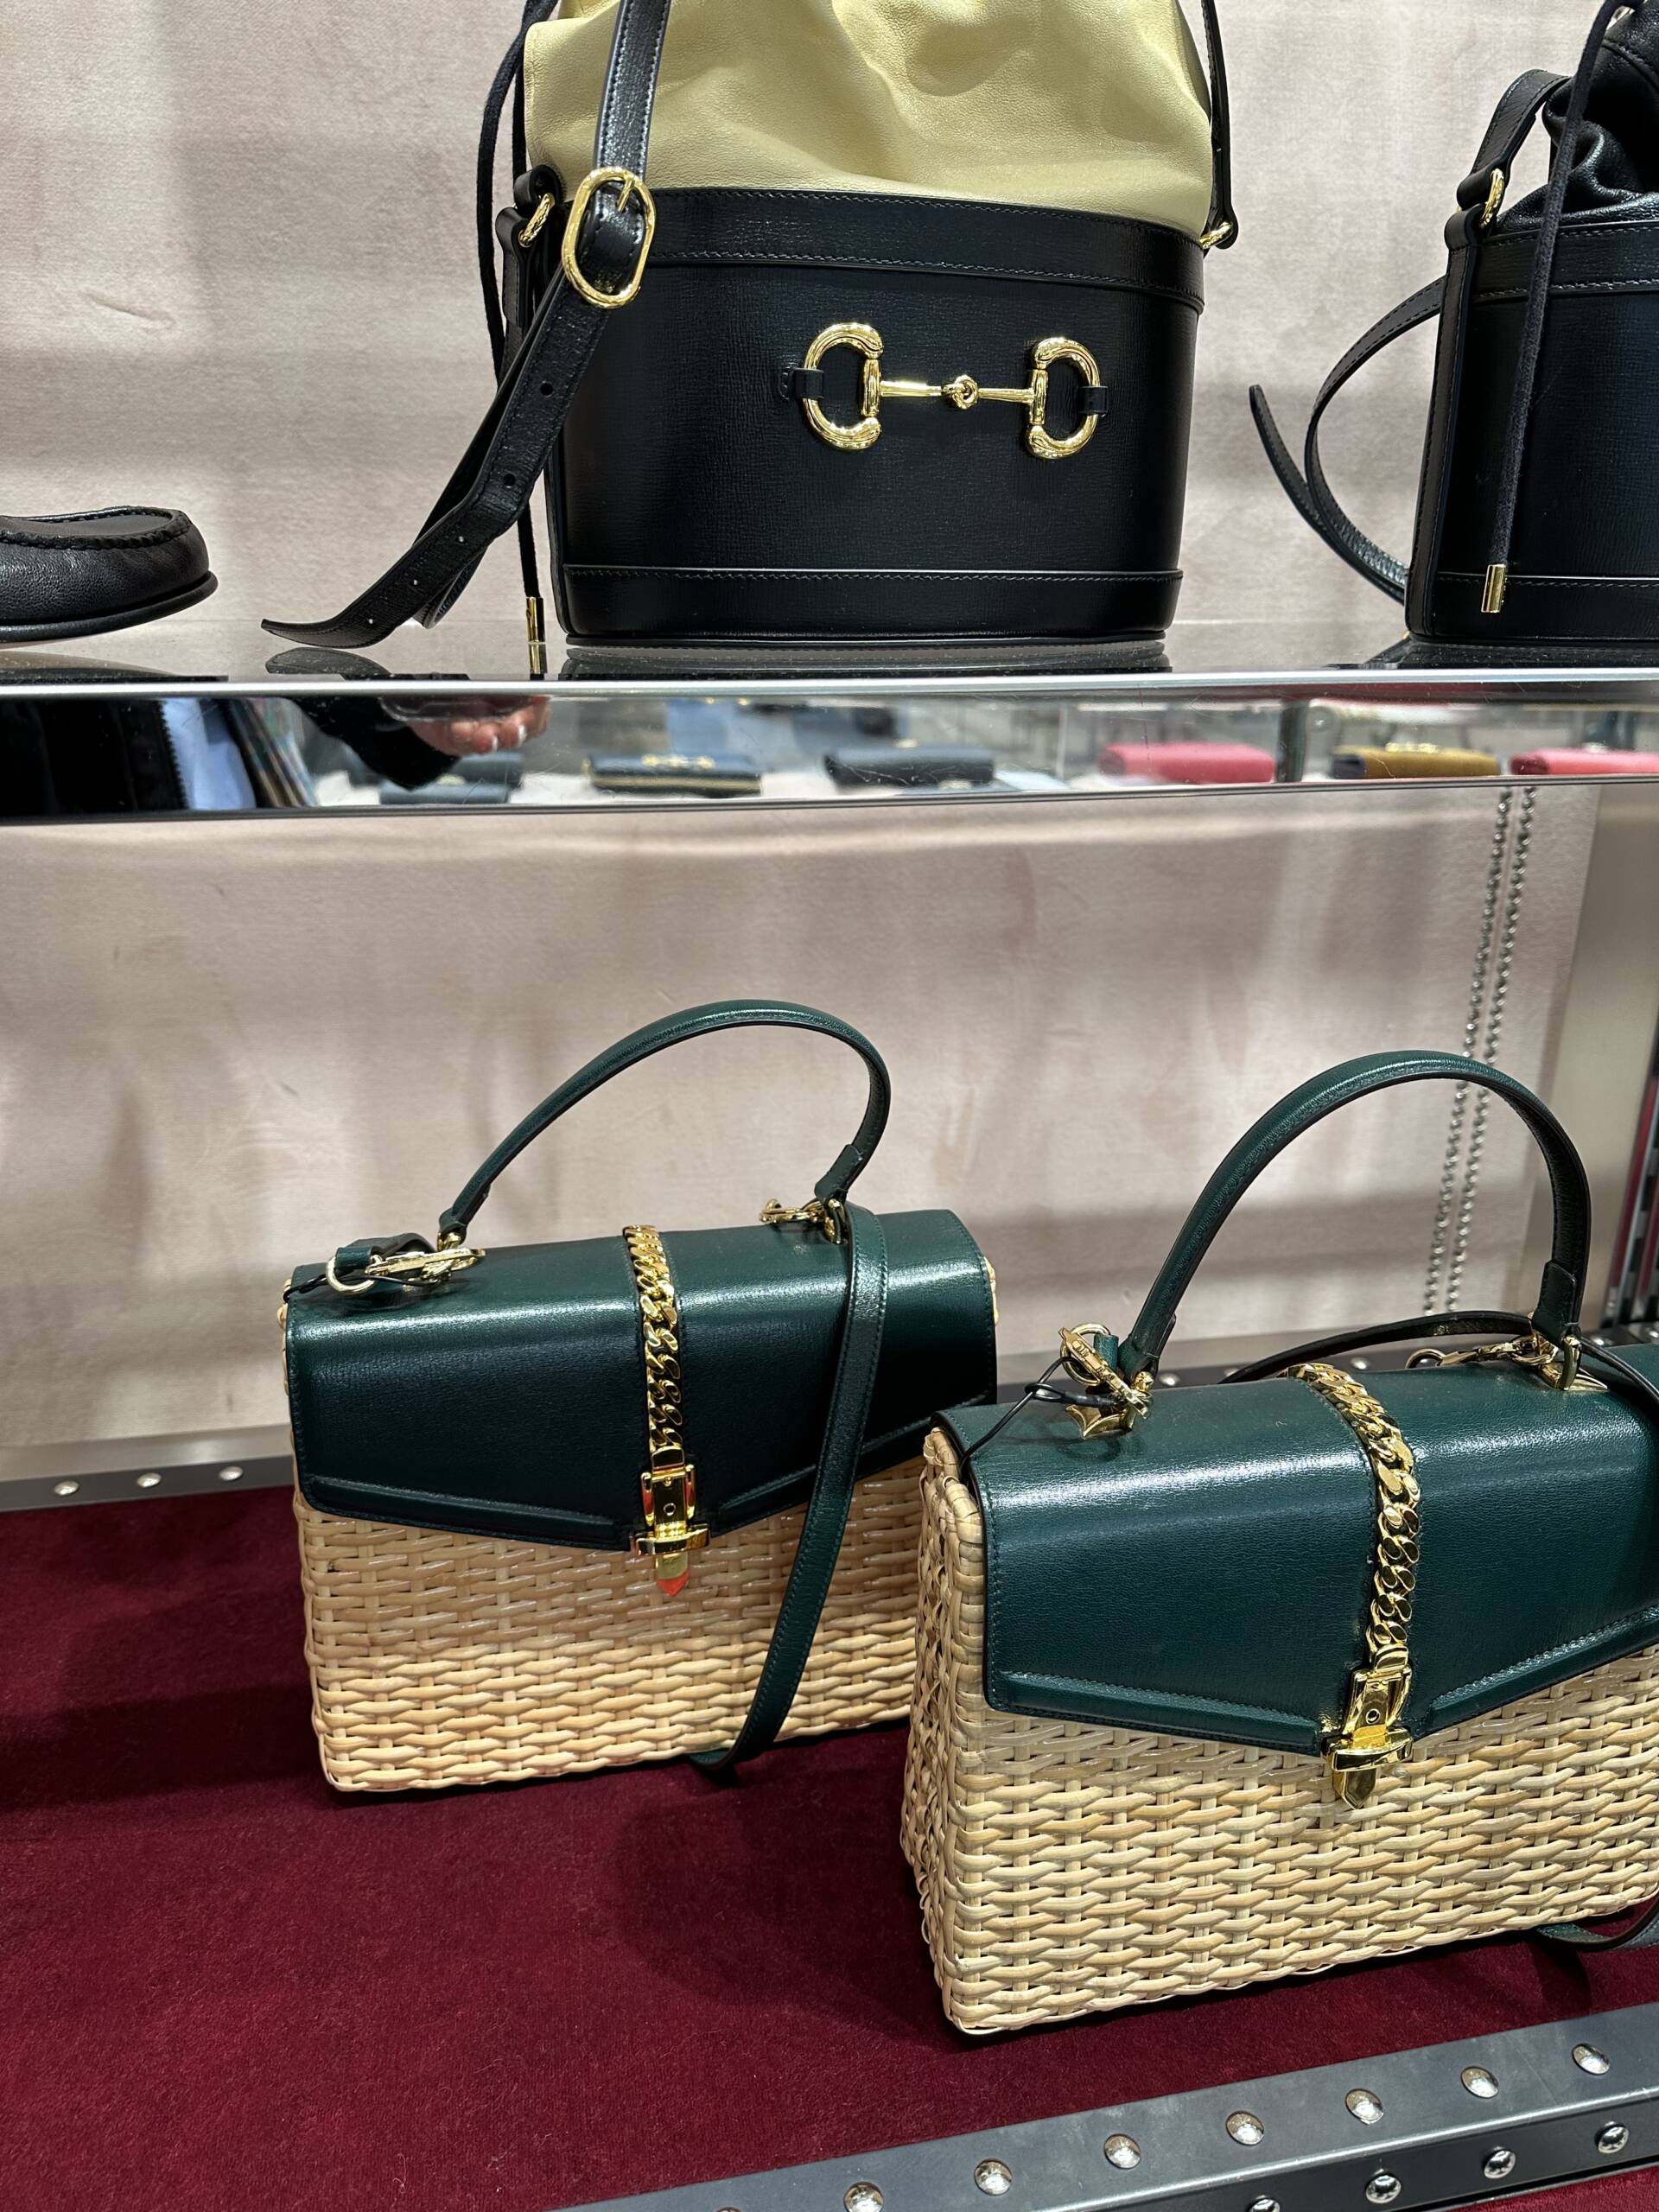 Gucci picnic bags on display at Paris Outlet mall